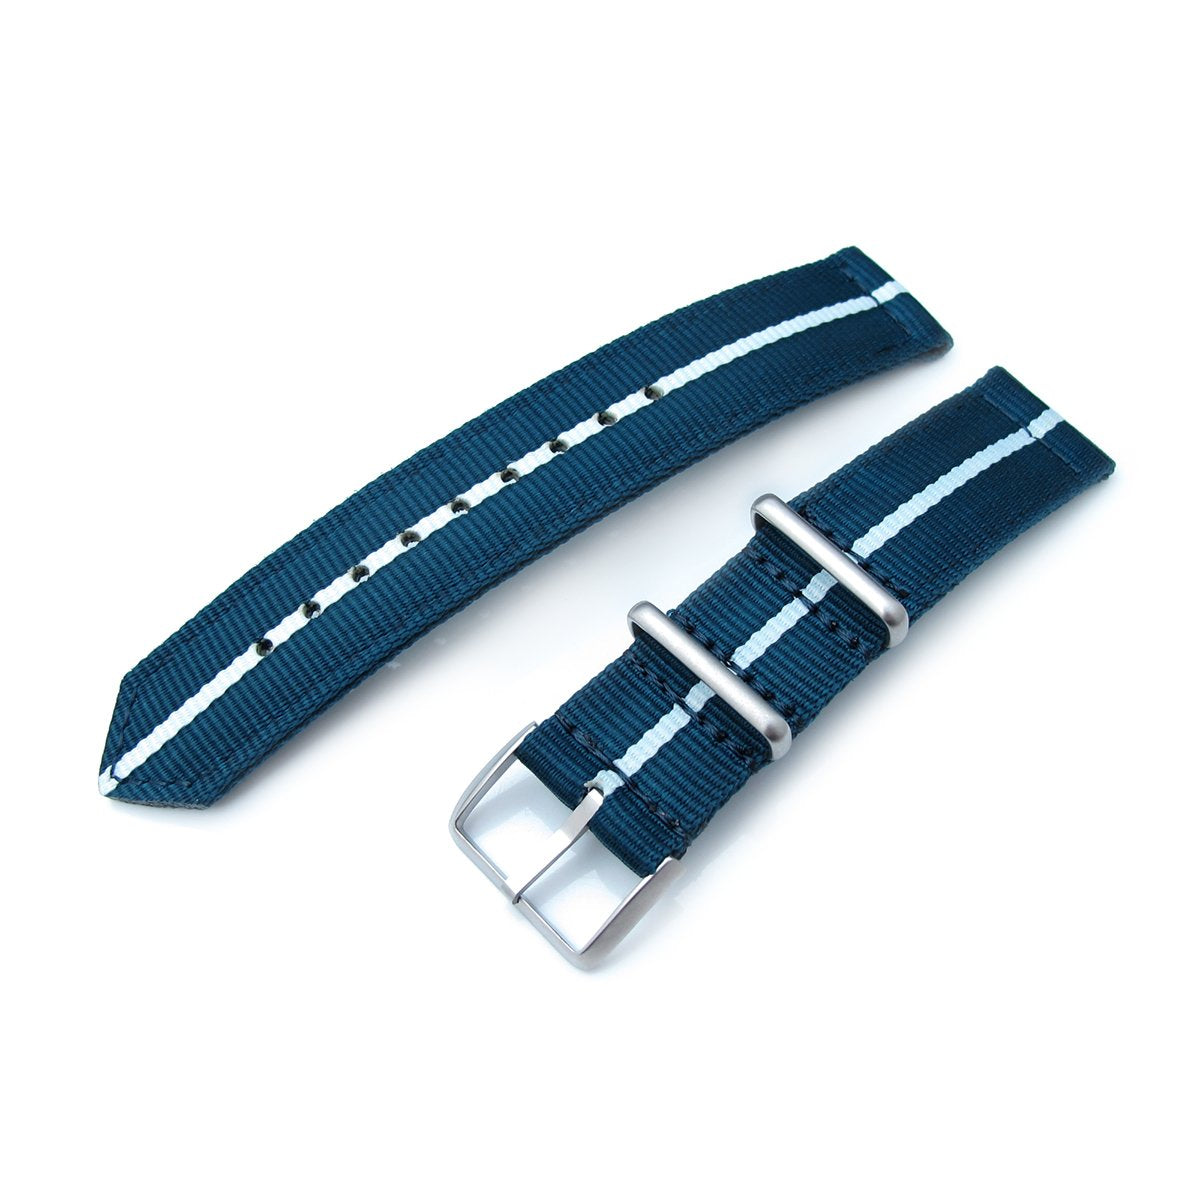 20mm Two Piece WW2 G10 Nylon Navy Blue &amp; White Brushed Buckle Strapcode Watch Bands